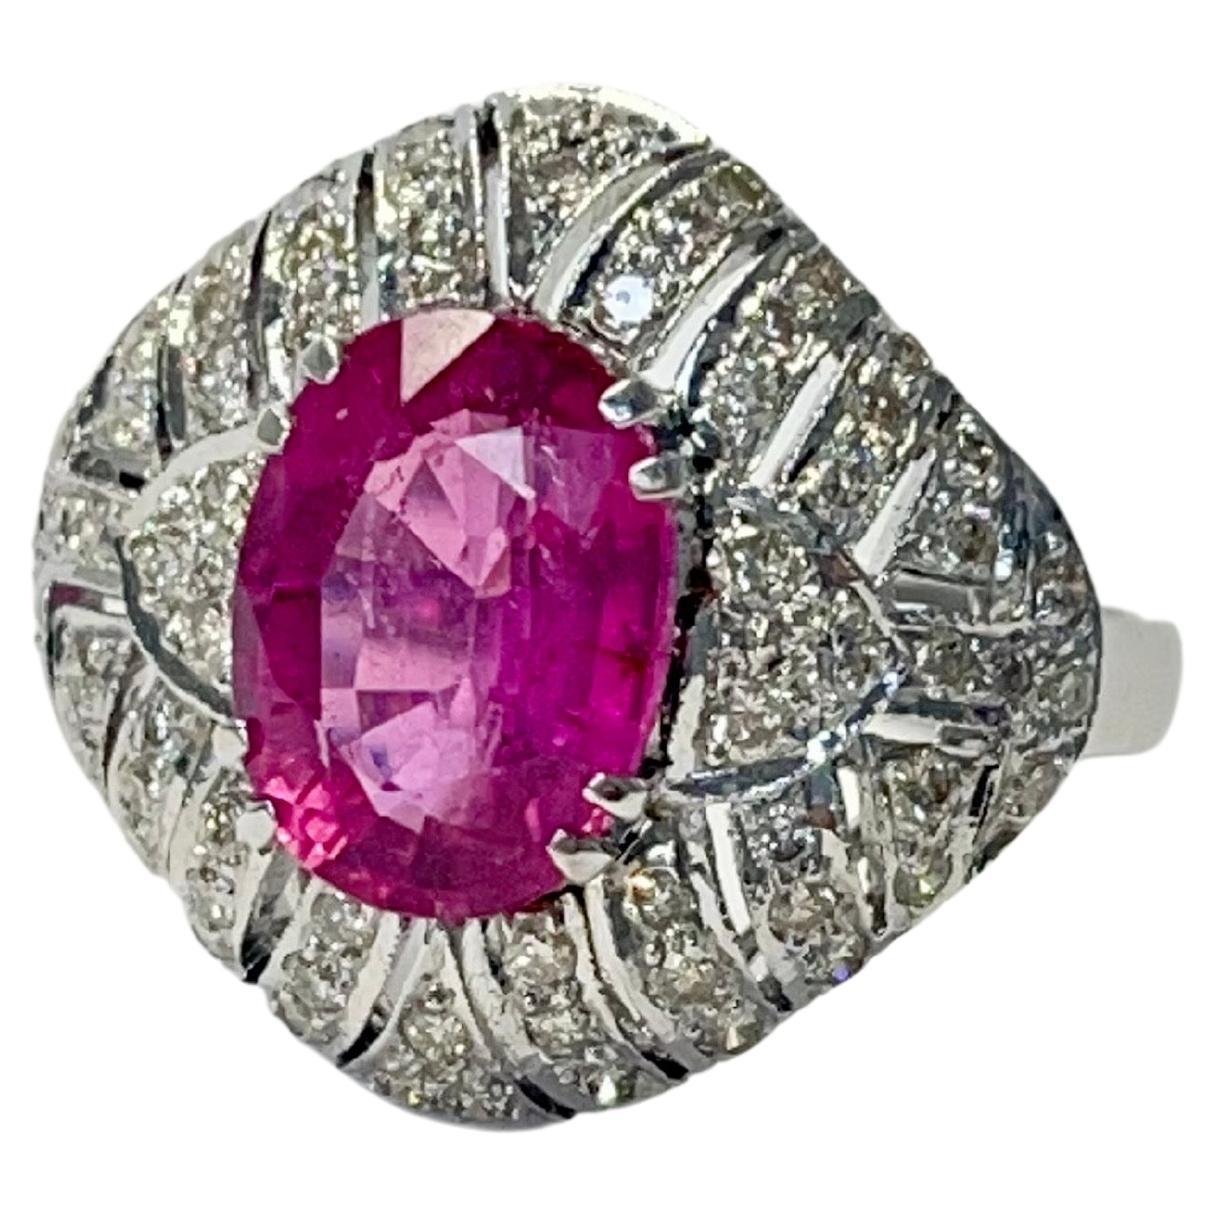 1920 Art Deco Diamond and Oval Rubellite Engagement Ring in 18K White Gold